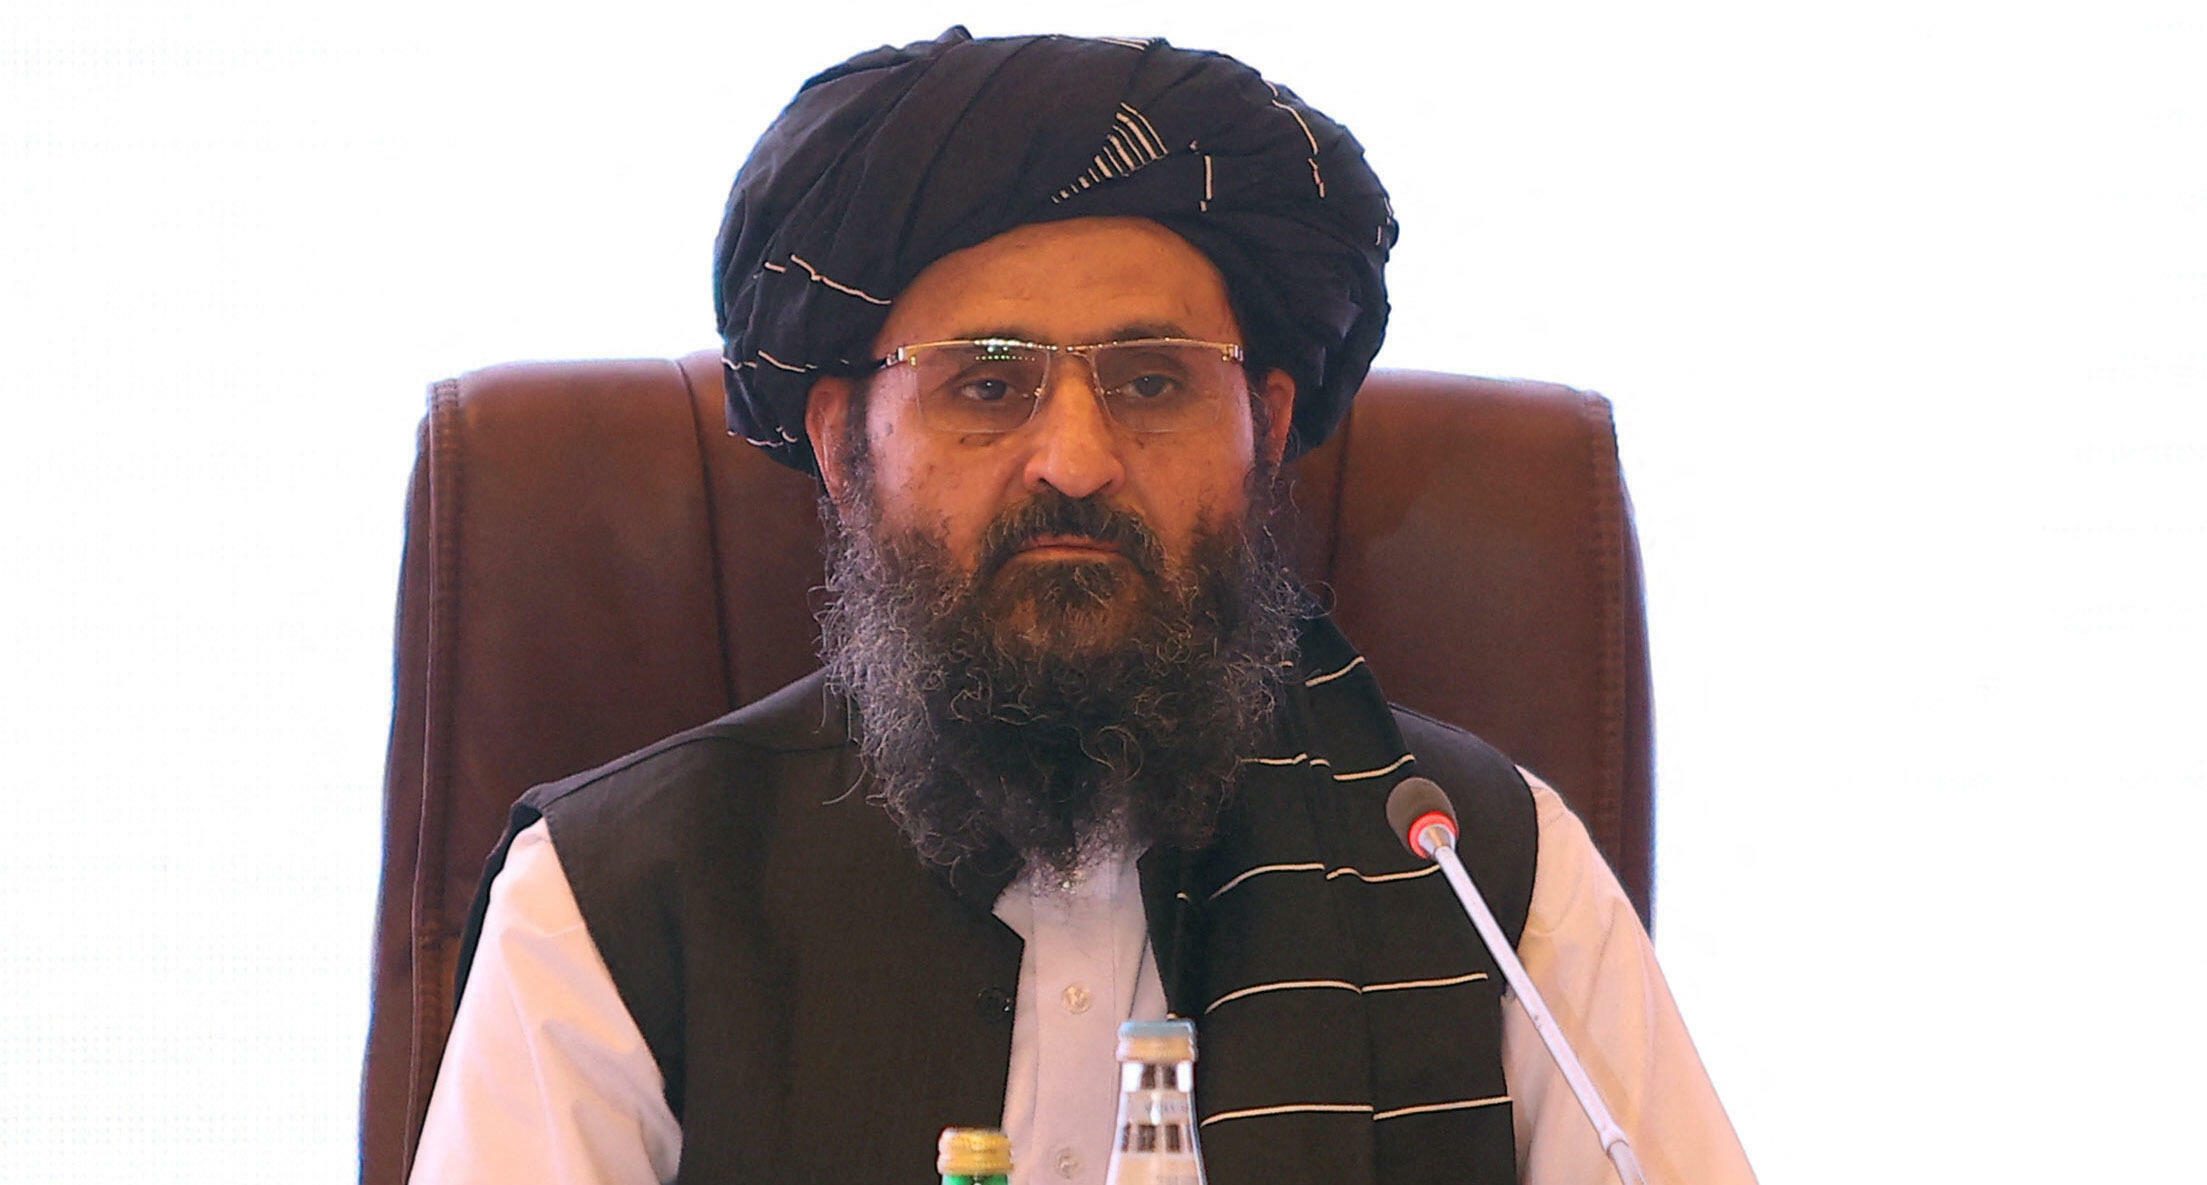 Who is Mullah Abdul Ghani Baradar, the man who will lead the new Taliban government?